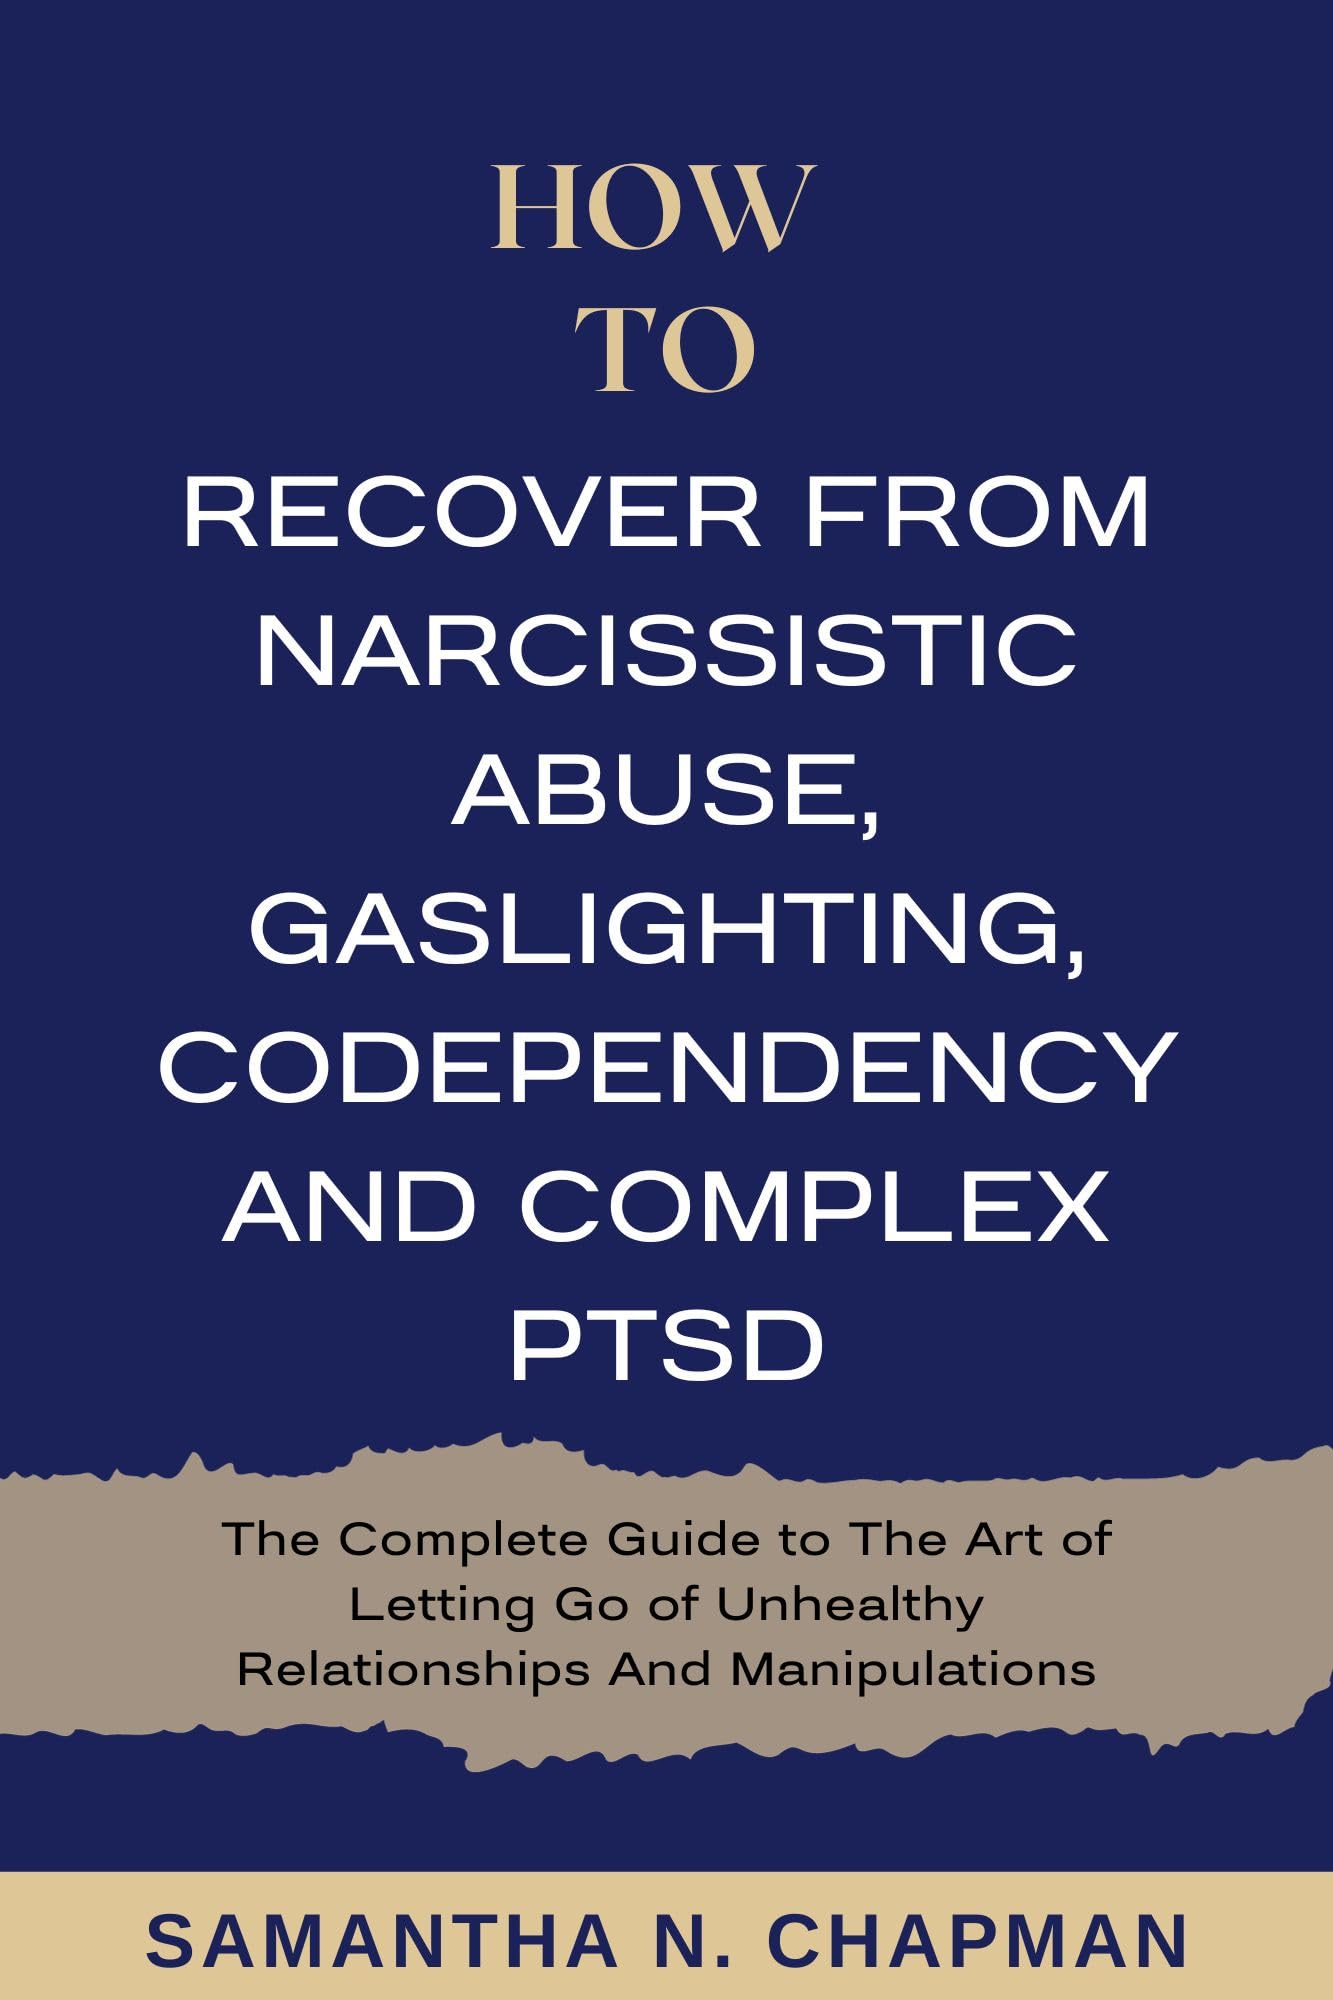 How to Recover from Narcissistic Abuse, Gaslighting, Codependency and Complex PTSD: The Complete Guide to the Art of Letting go Unhealthy Relationships and Manipulations (Intimate Ties Book 3)